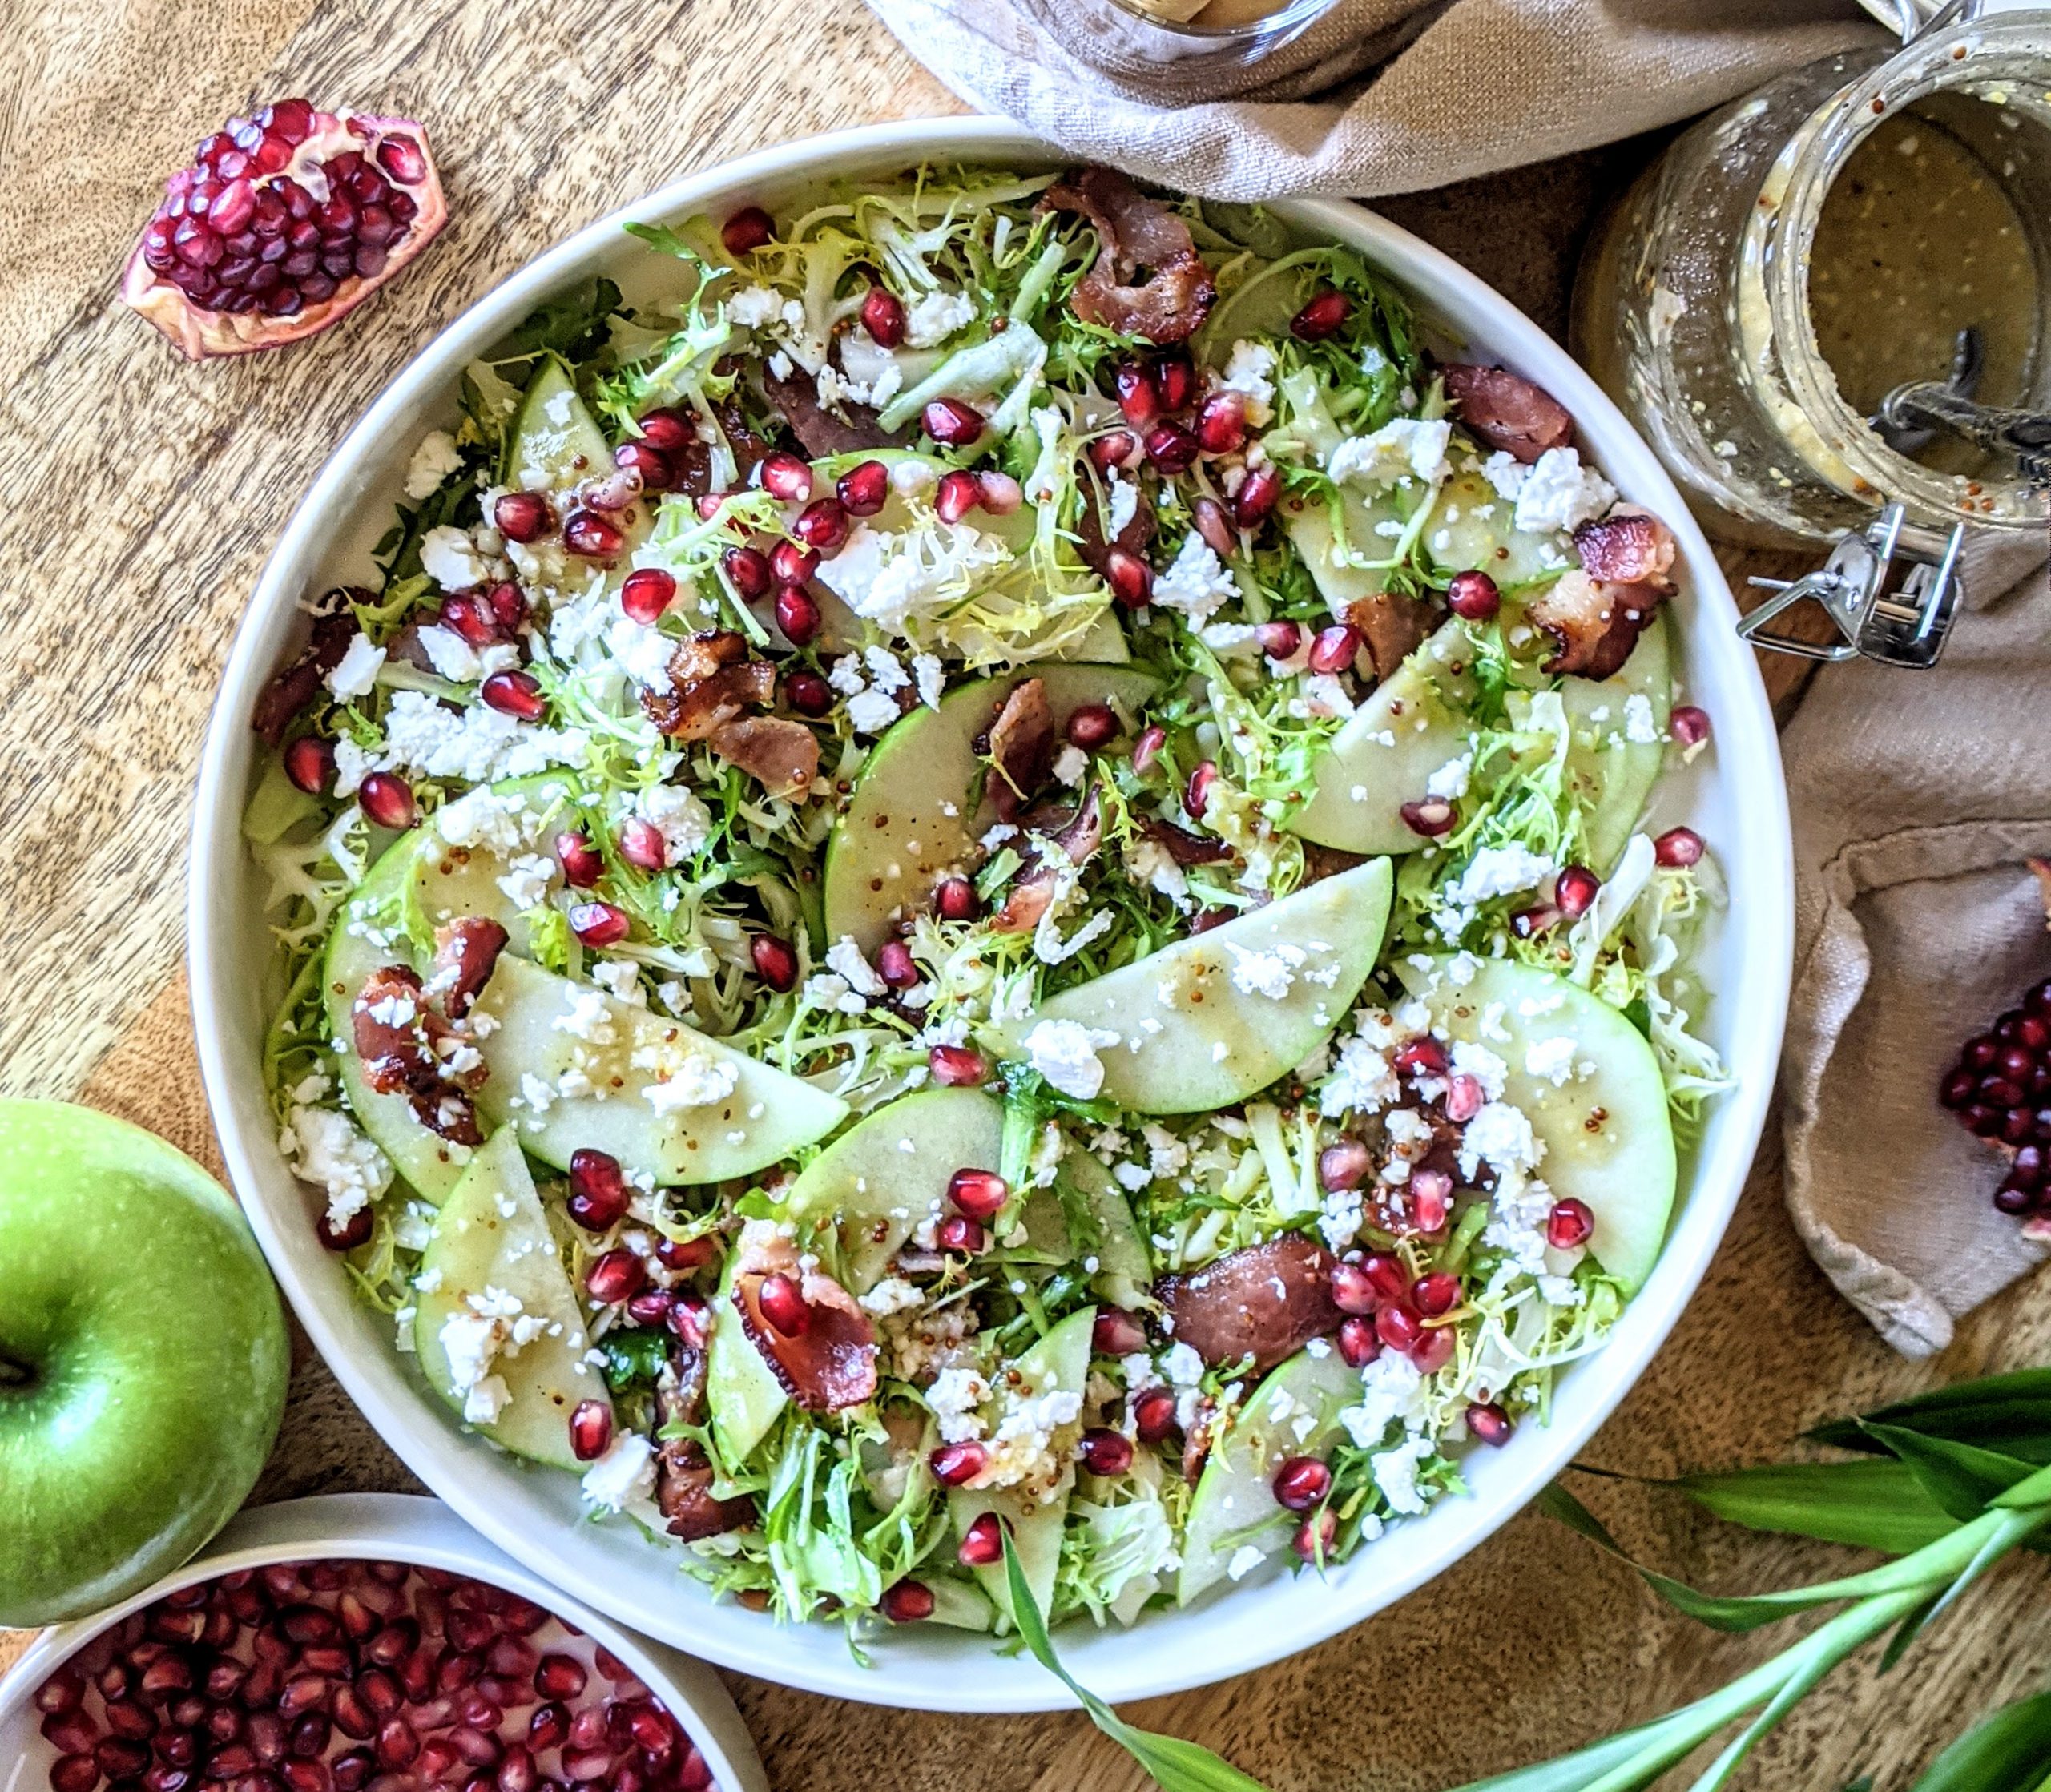 Fall frisée salad with pomegranate, apple, bacon, and feta.